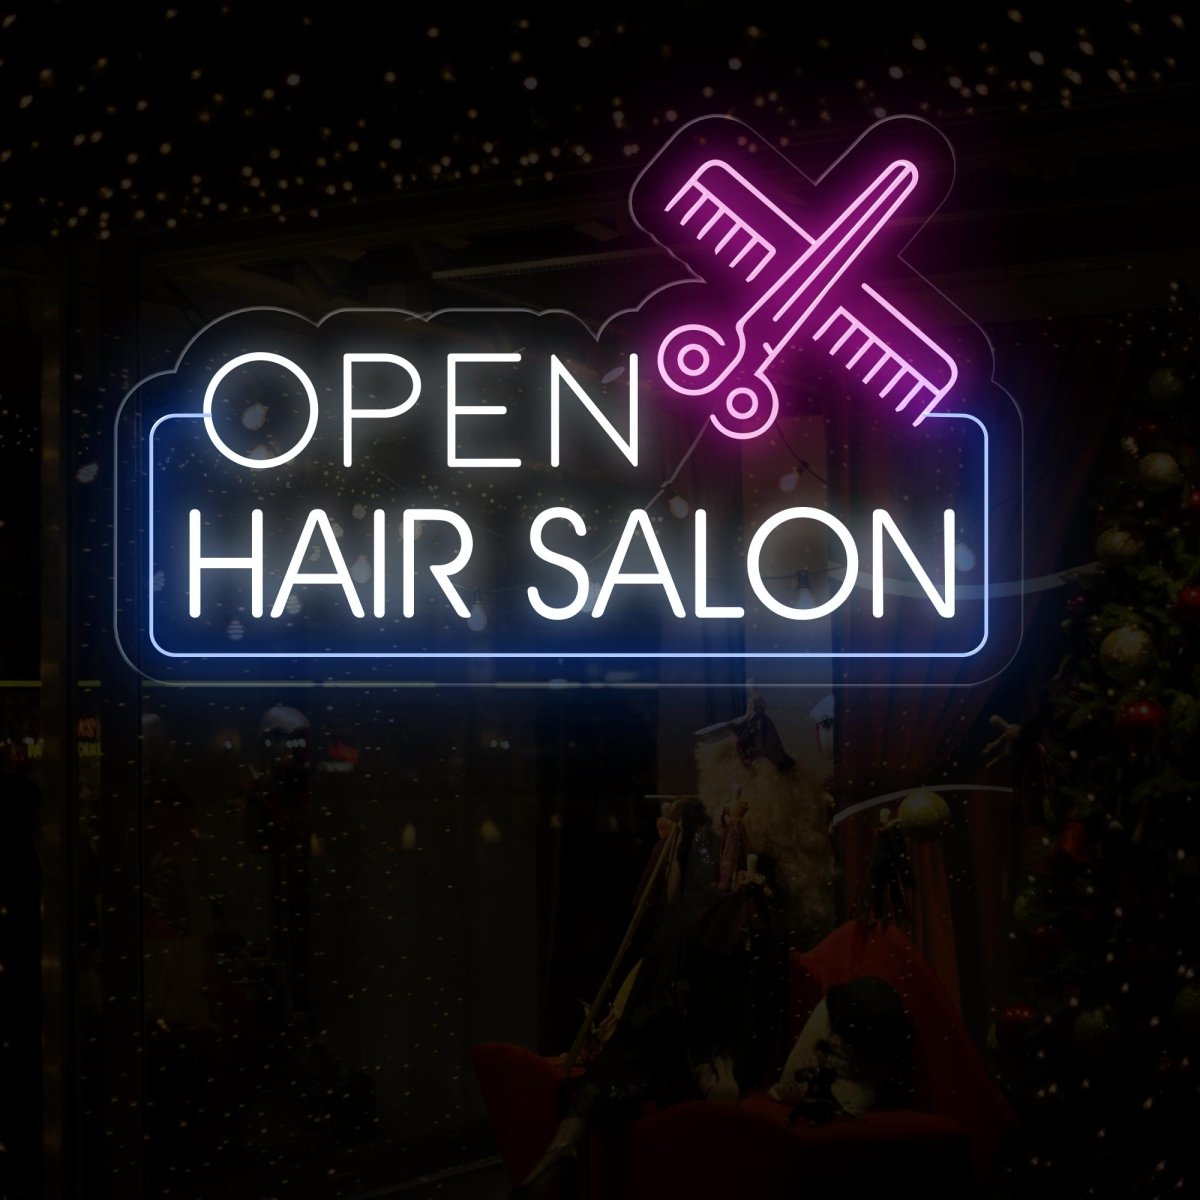 Hair Salon Open LED Neon Sign | Outdoor Business Signage - NEONXPERT